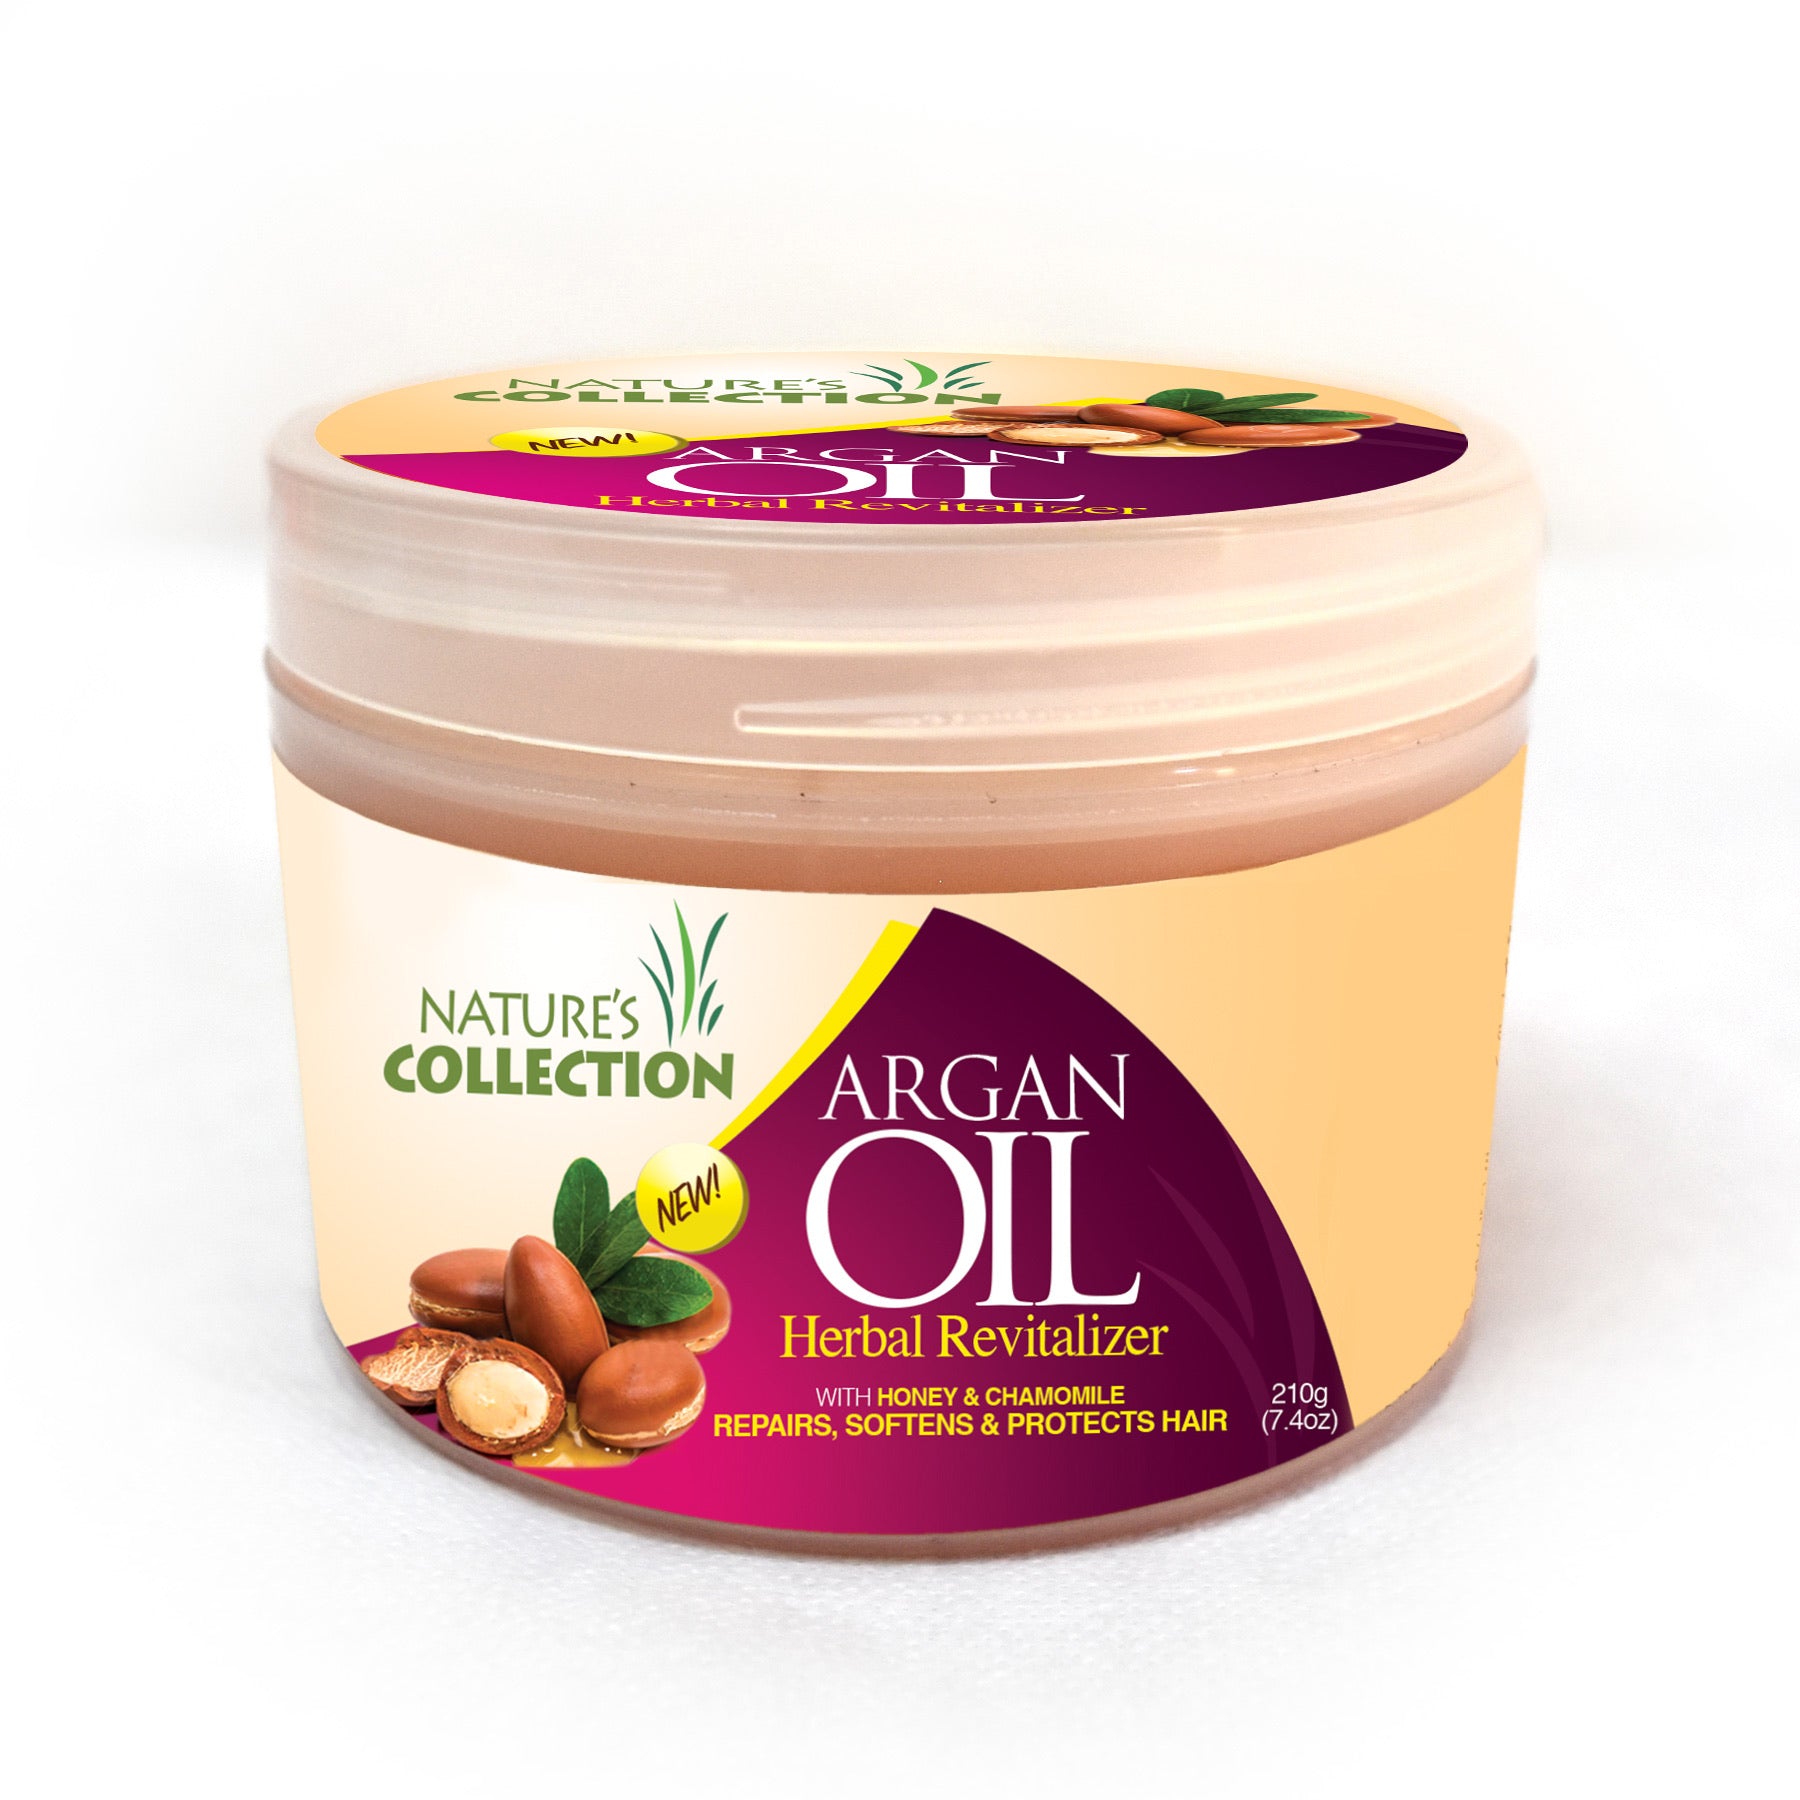 Nature’s collection argan oil herbal revitalized 7.5oz